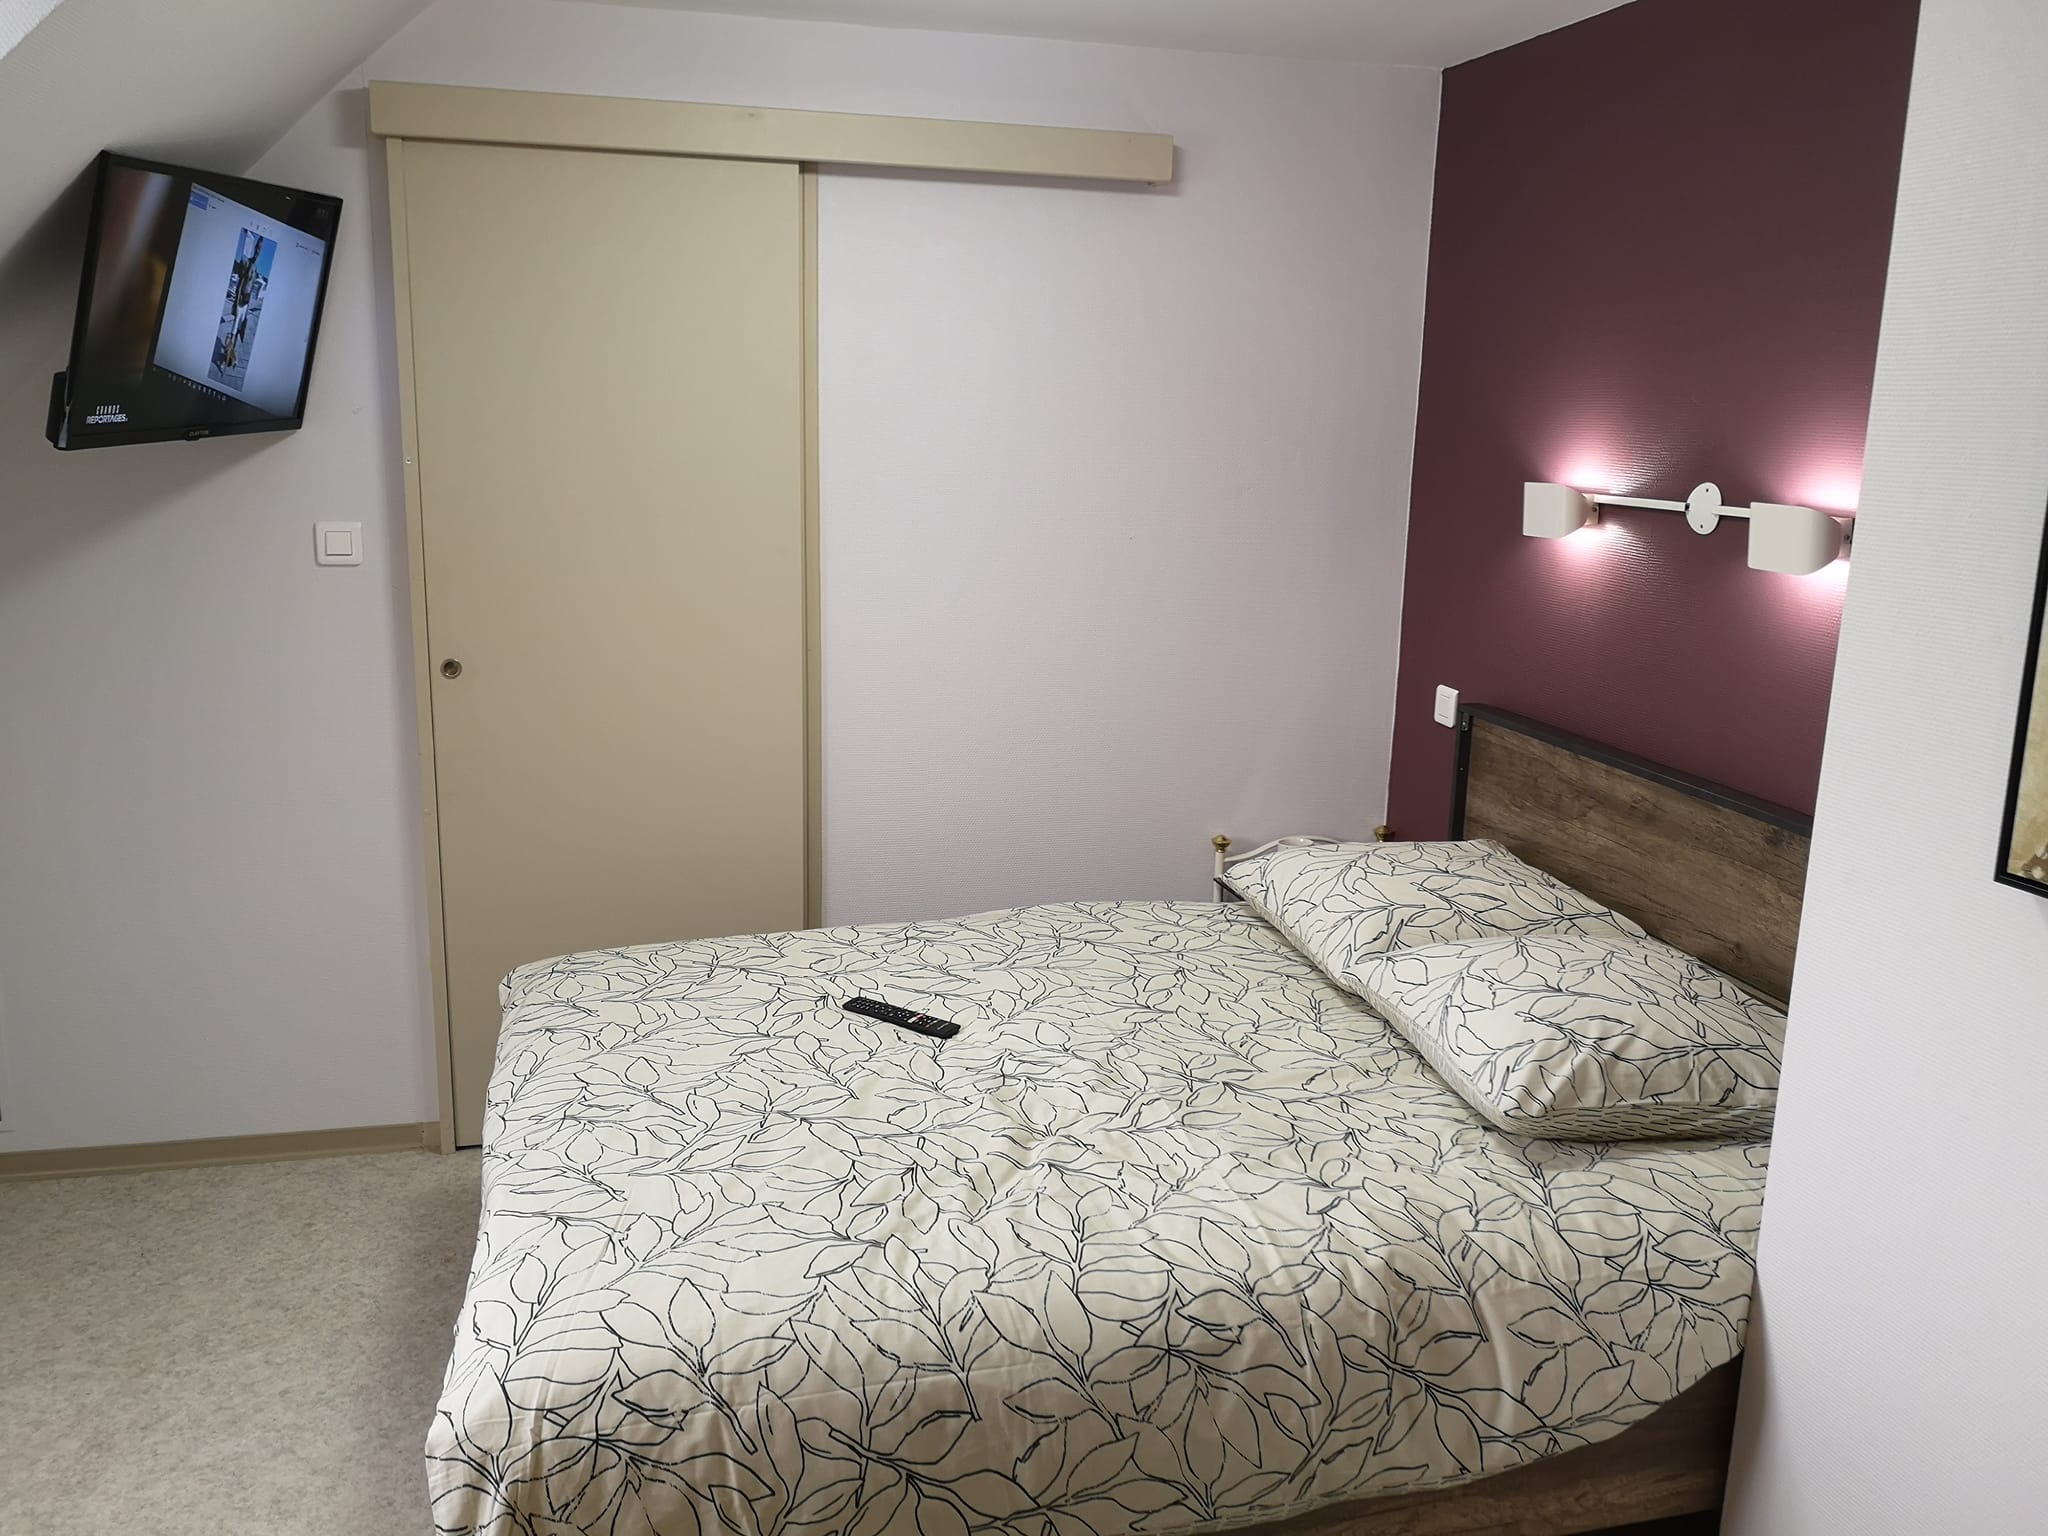 ChambresDhotes-AubergeQuatreRoutesAlbussac-chambre3_10